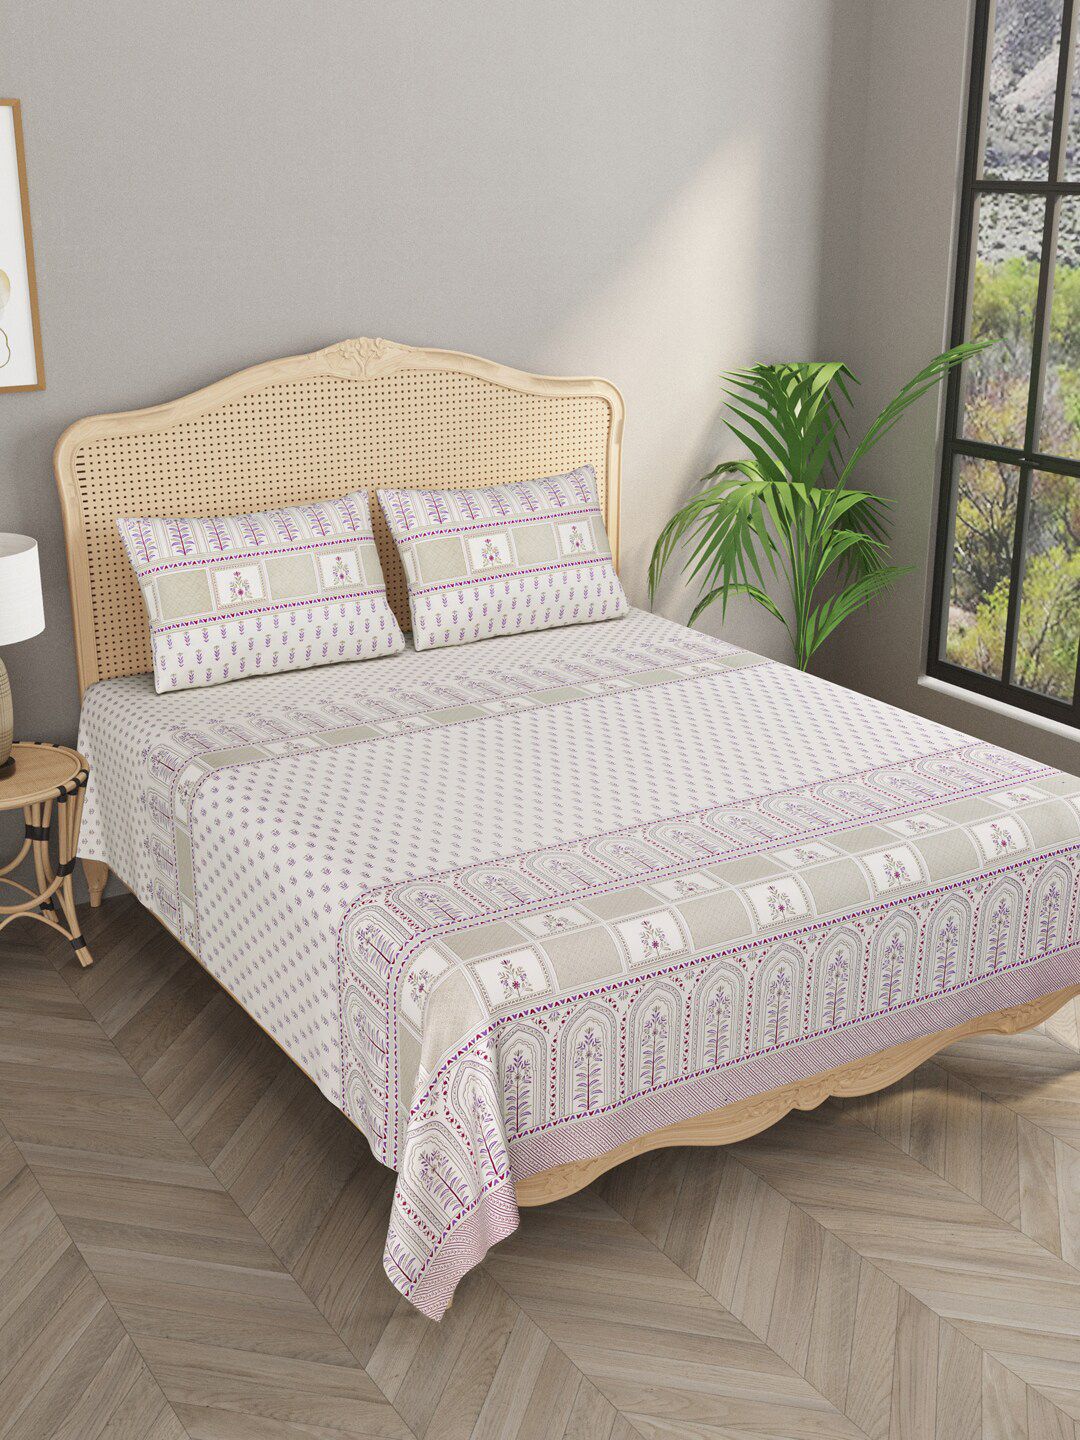 Gulaab Jaipur Purple & White Ethnic Motifs 400 TC King Bedsheet with 2 Pillow Covers Price in India